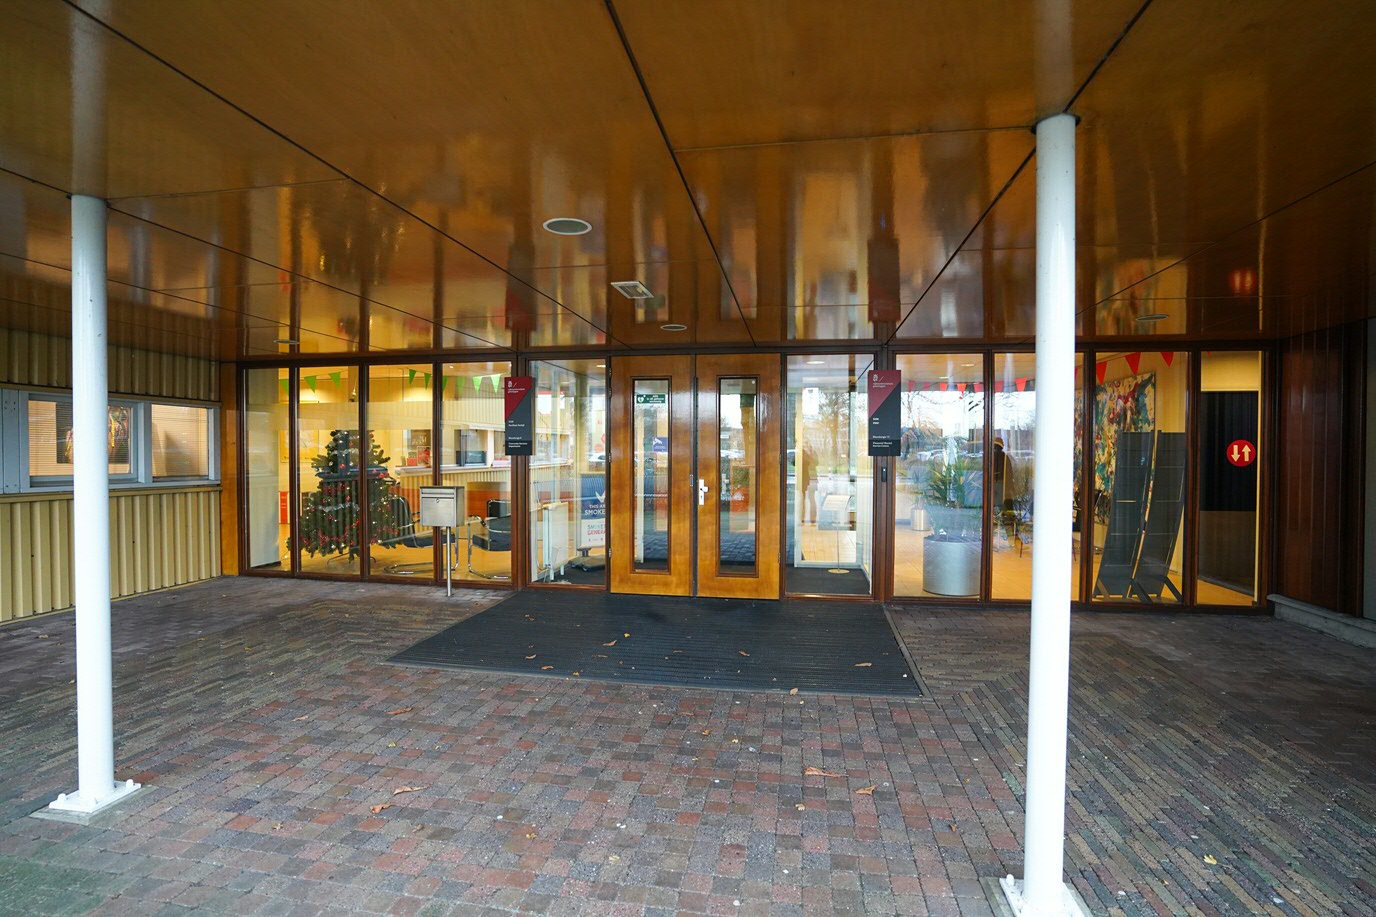 Main entrance to both blauwborgje 8 and 10